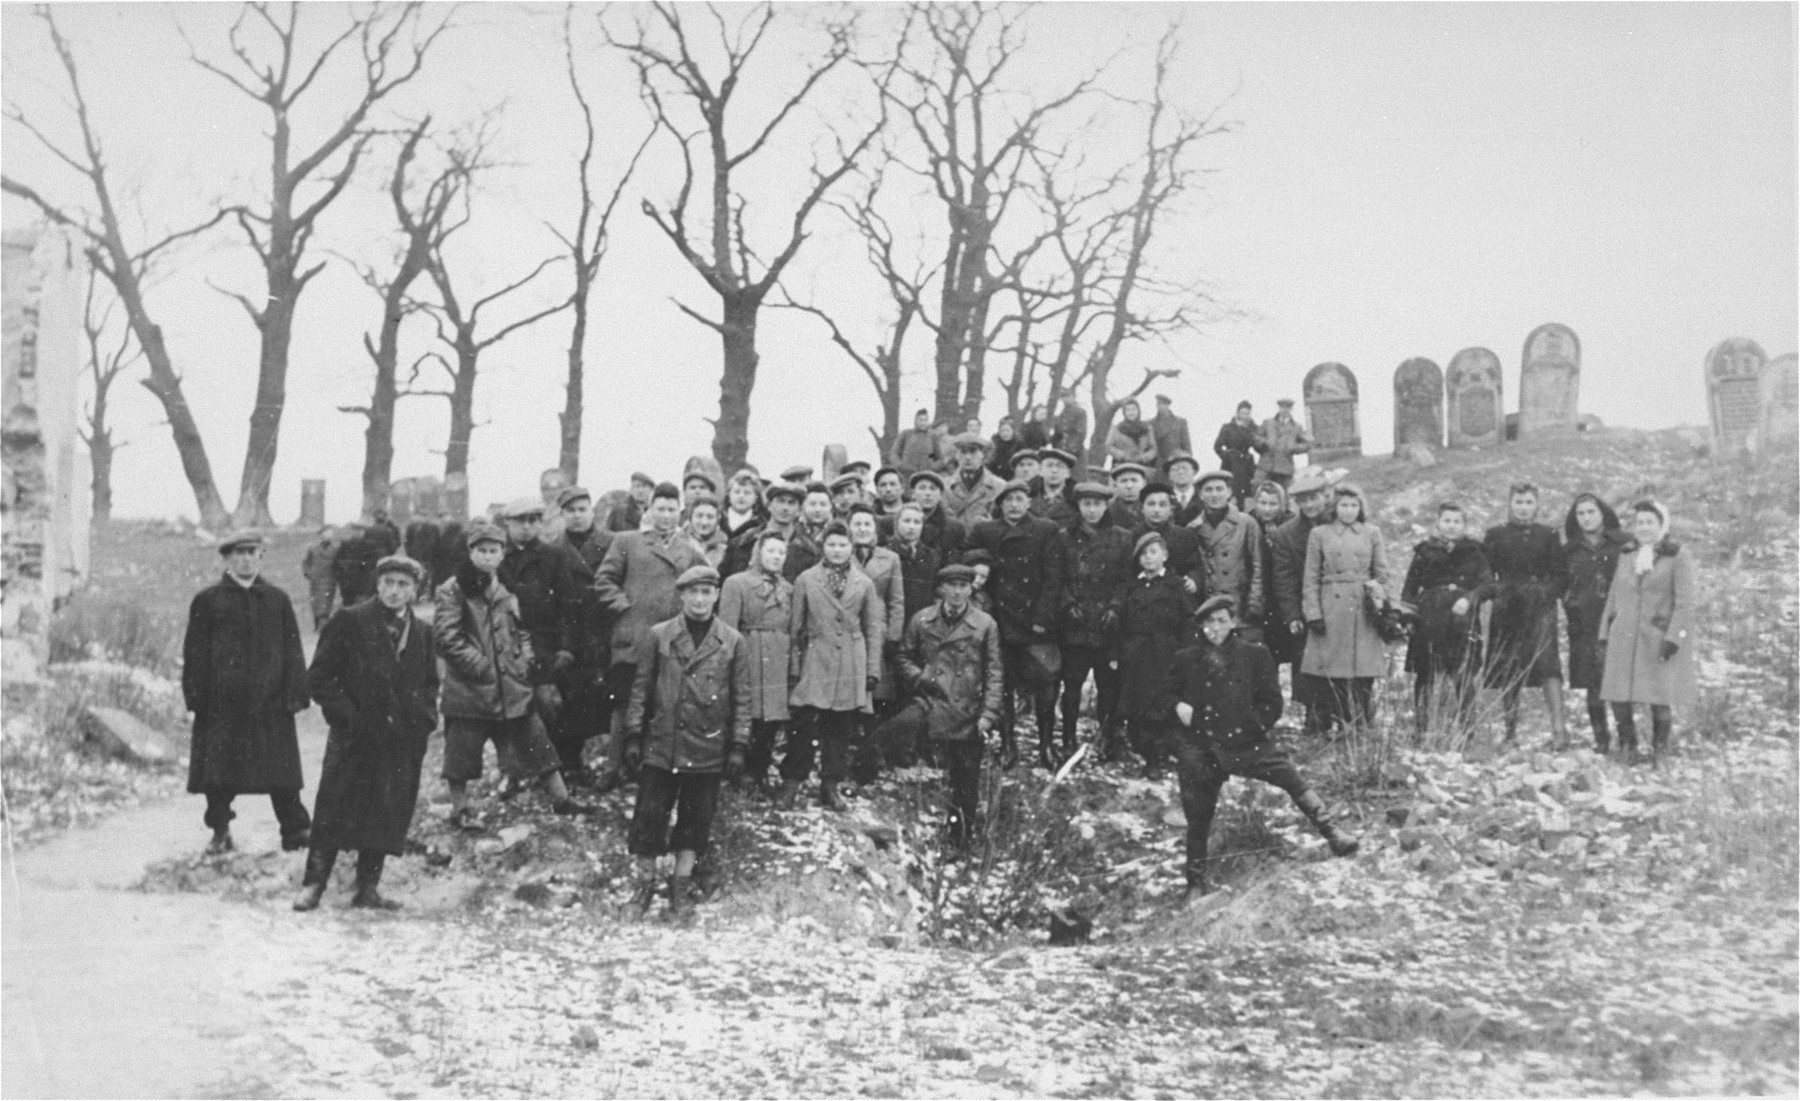 Group portrait of Jews from Ostrowiec standing on the site of a mass grave for 2000 Jews shot during the October 1942 action.  Behind them is a portion of the vandalized Jewish cemetery.  

Among those pictured is Berek Blumensztok.  He is standing in the center. Berek  returned to Ostrowiec after the war with the hope of reuniting with his family.  However, all had perished, including his mother, father and 8 siblings. 

Also pictured is Dora Weinberg Berman (third woman from the right).